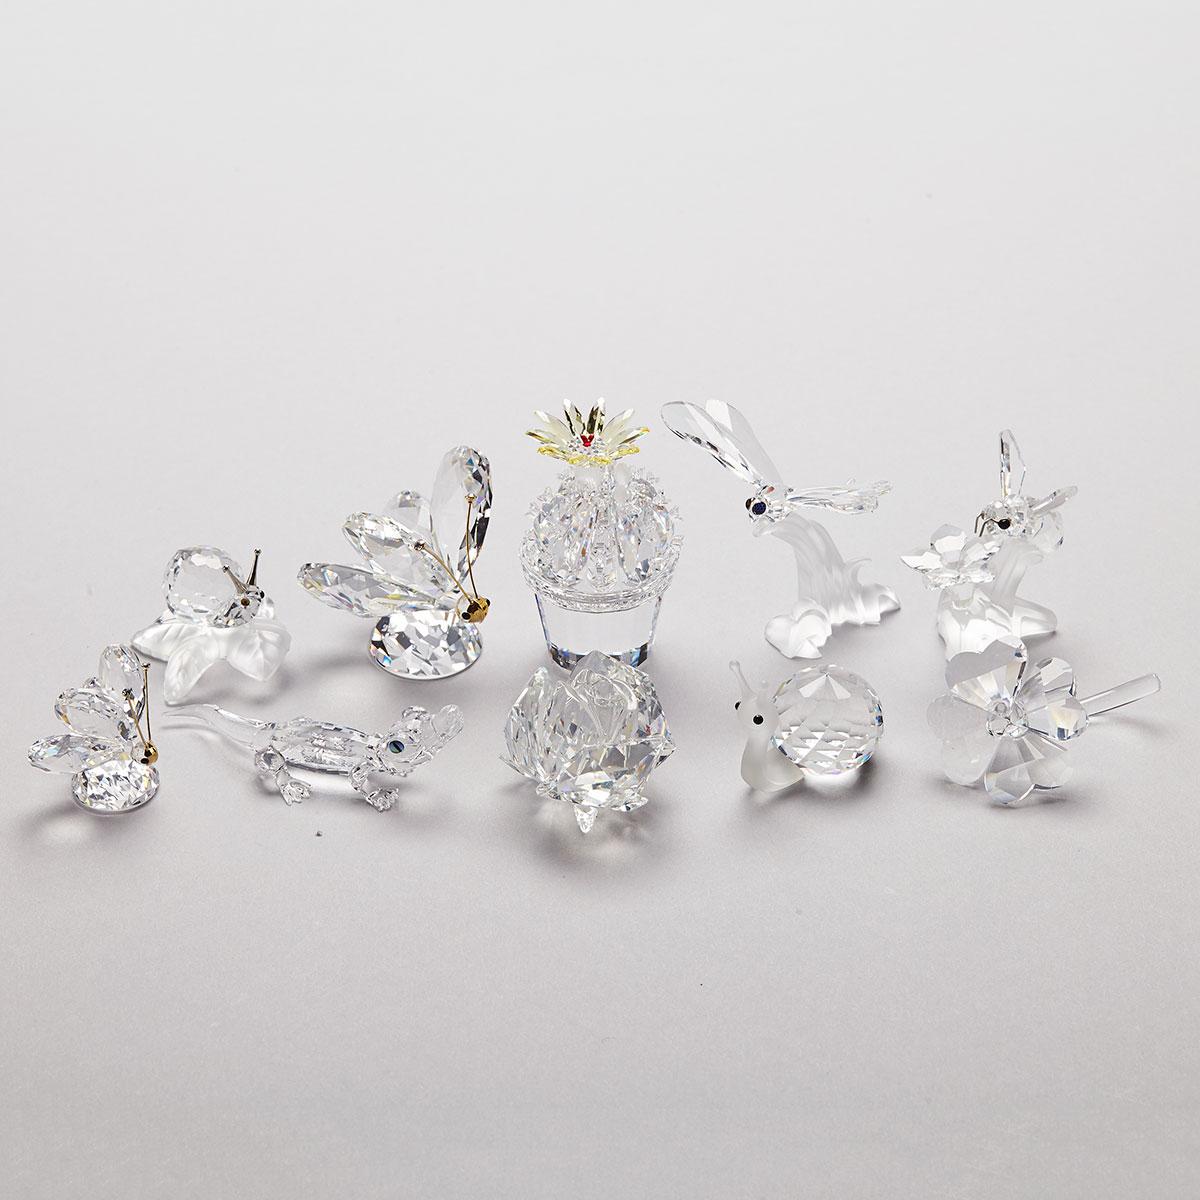 Ten Swarovski Crystal Flowers and Animals, late 20th/early 21st century